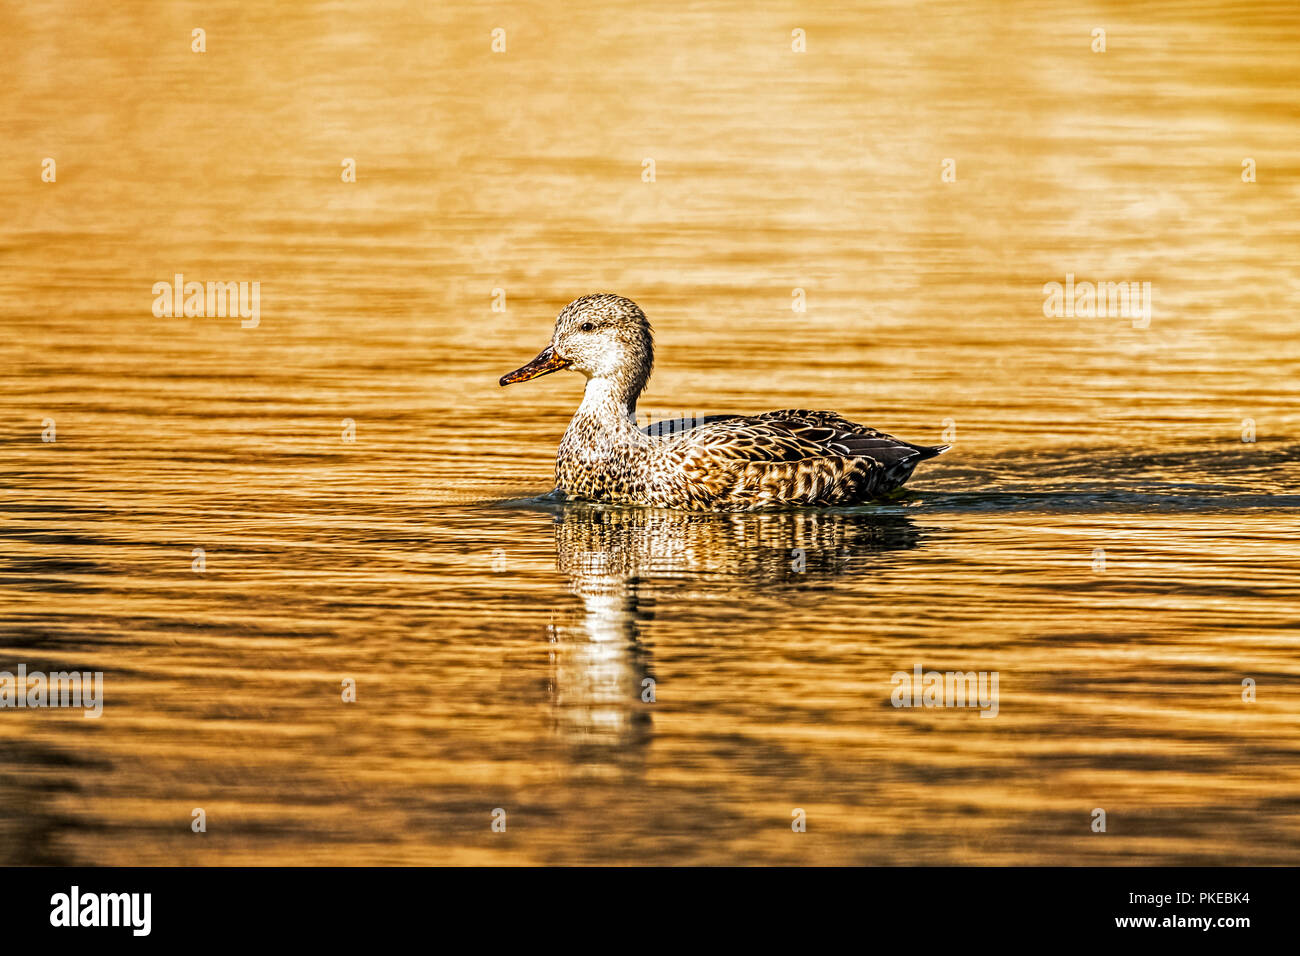 Duck swimming on the tranquil water with golden sunlight reflected on the surface at sunset; Wilcox, Arizona, United States of America Stock Photo